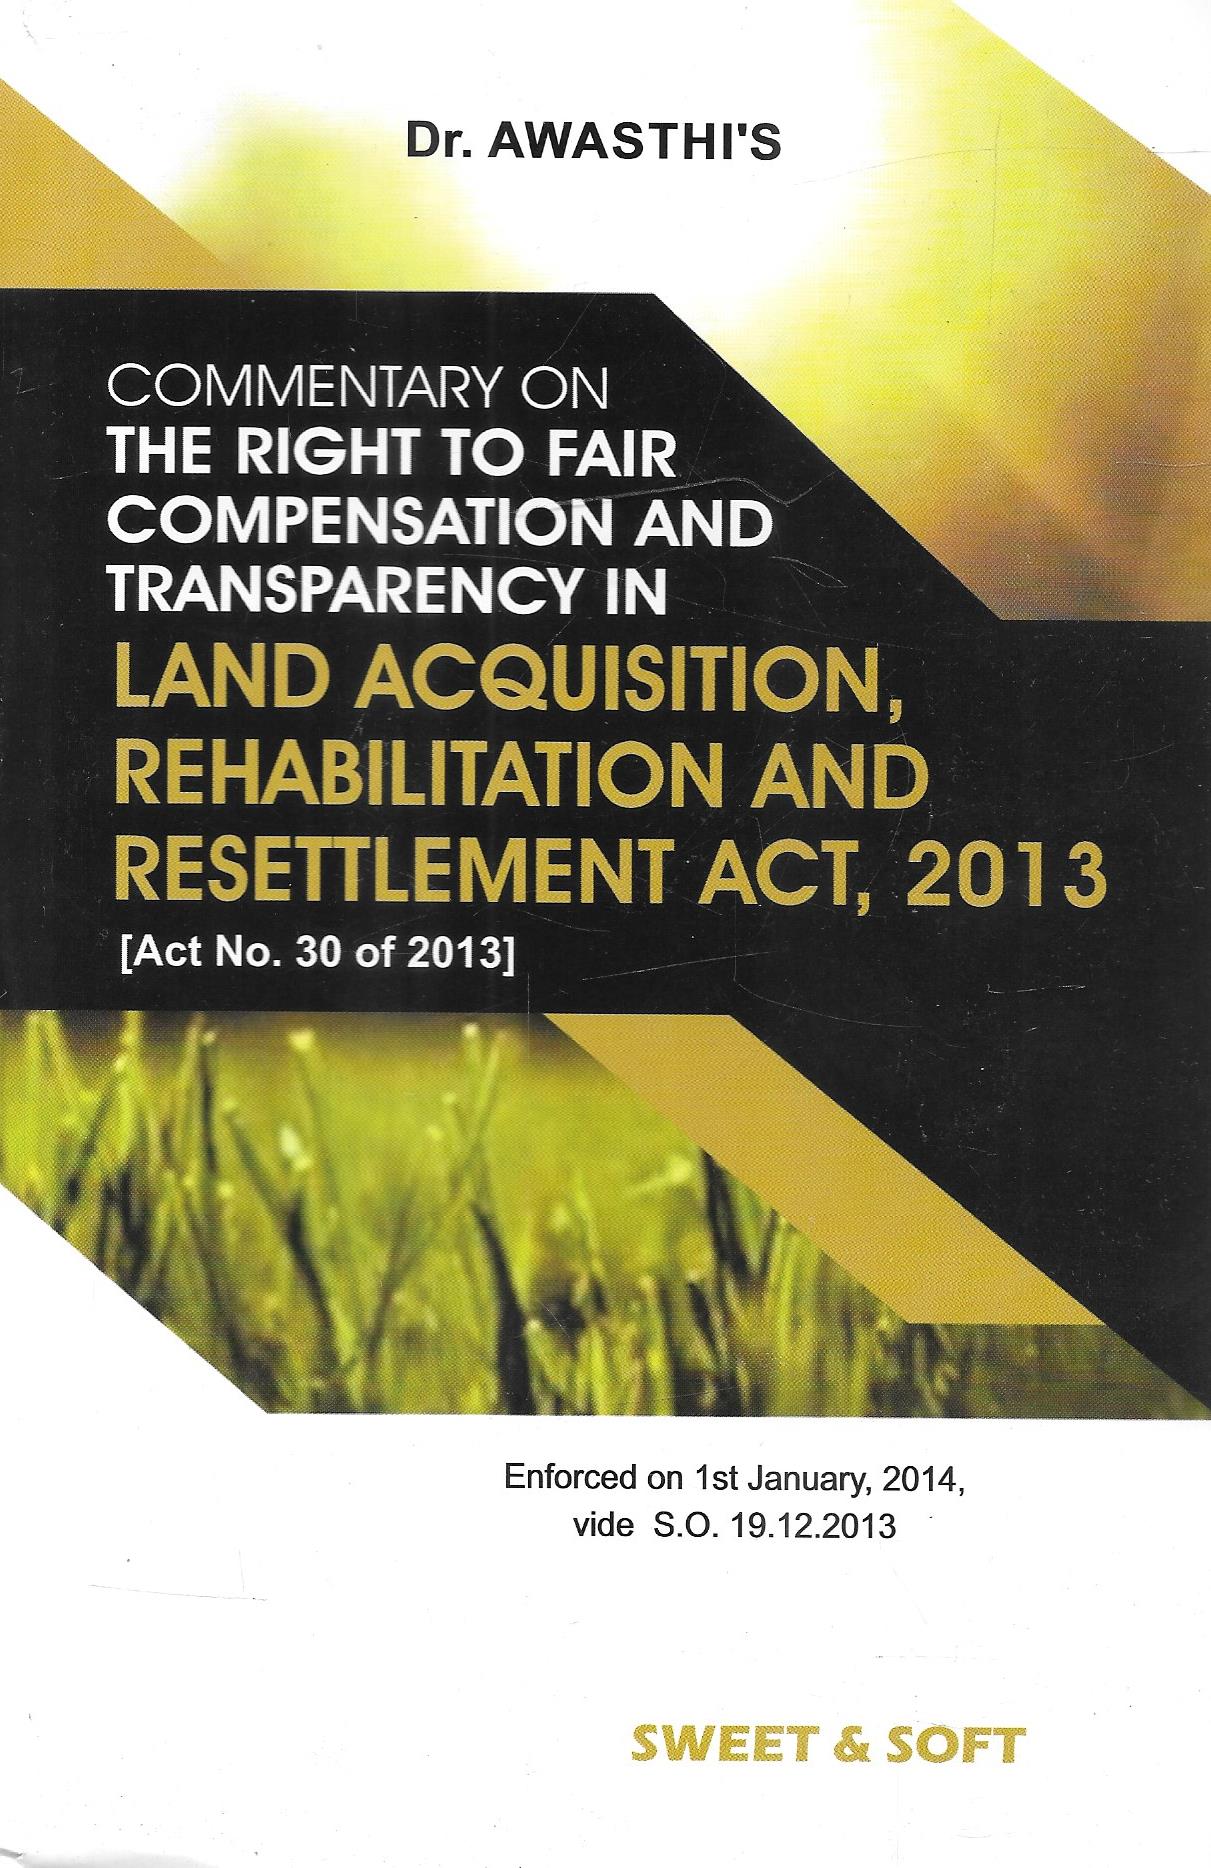 The Right To Fair Compensation And Transparency In Land Acquisition, Rehabilitation And Resettlement Act , 2013